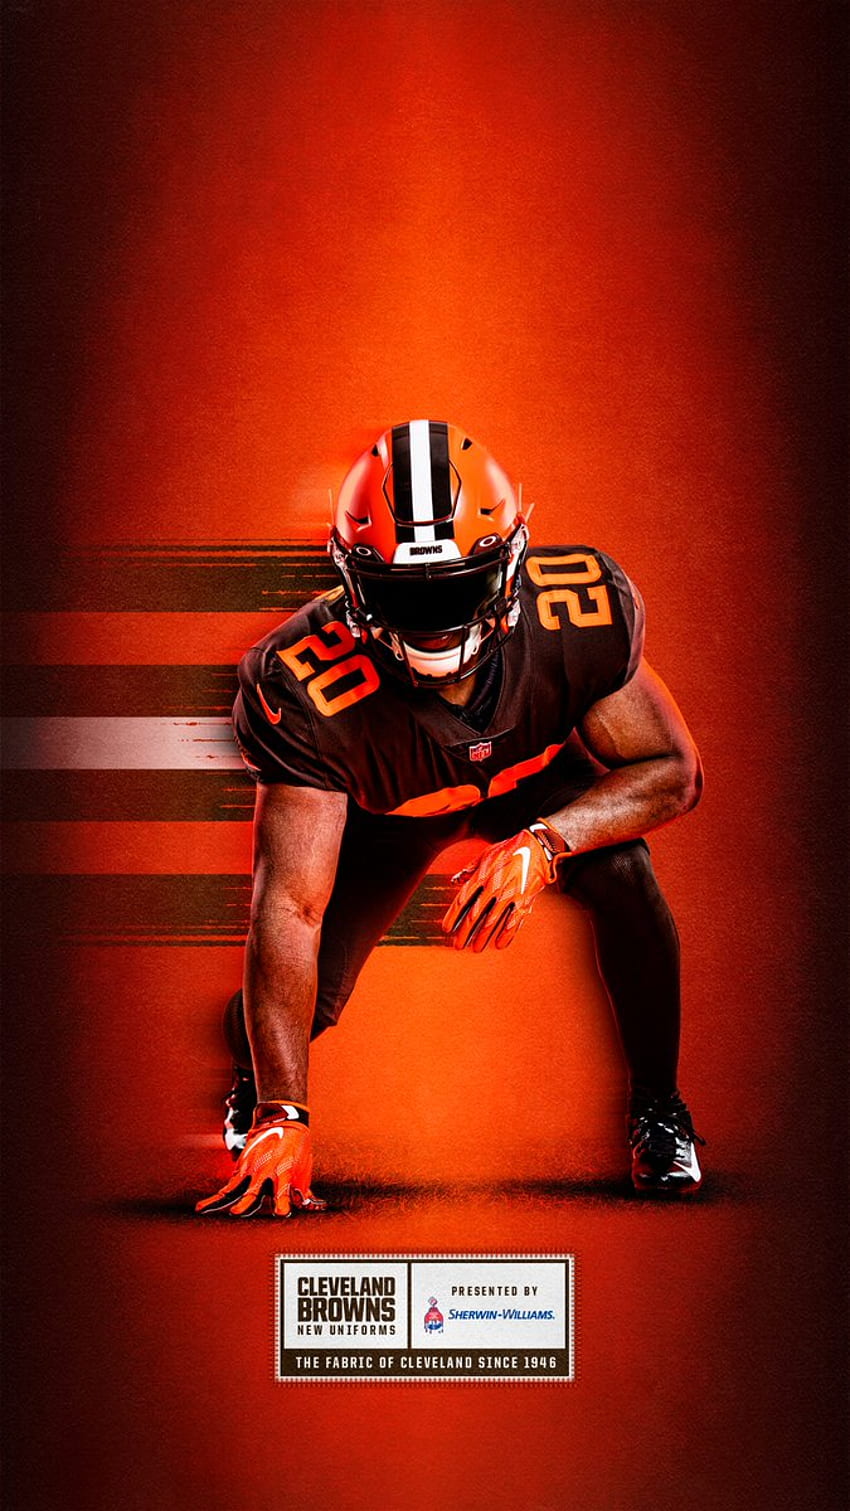 Cleveland Browns wallpaper iPhone  Cleveland browns wallpaper Cleveland  browns logo Cleveland browns